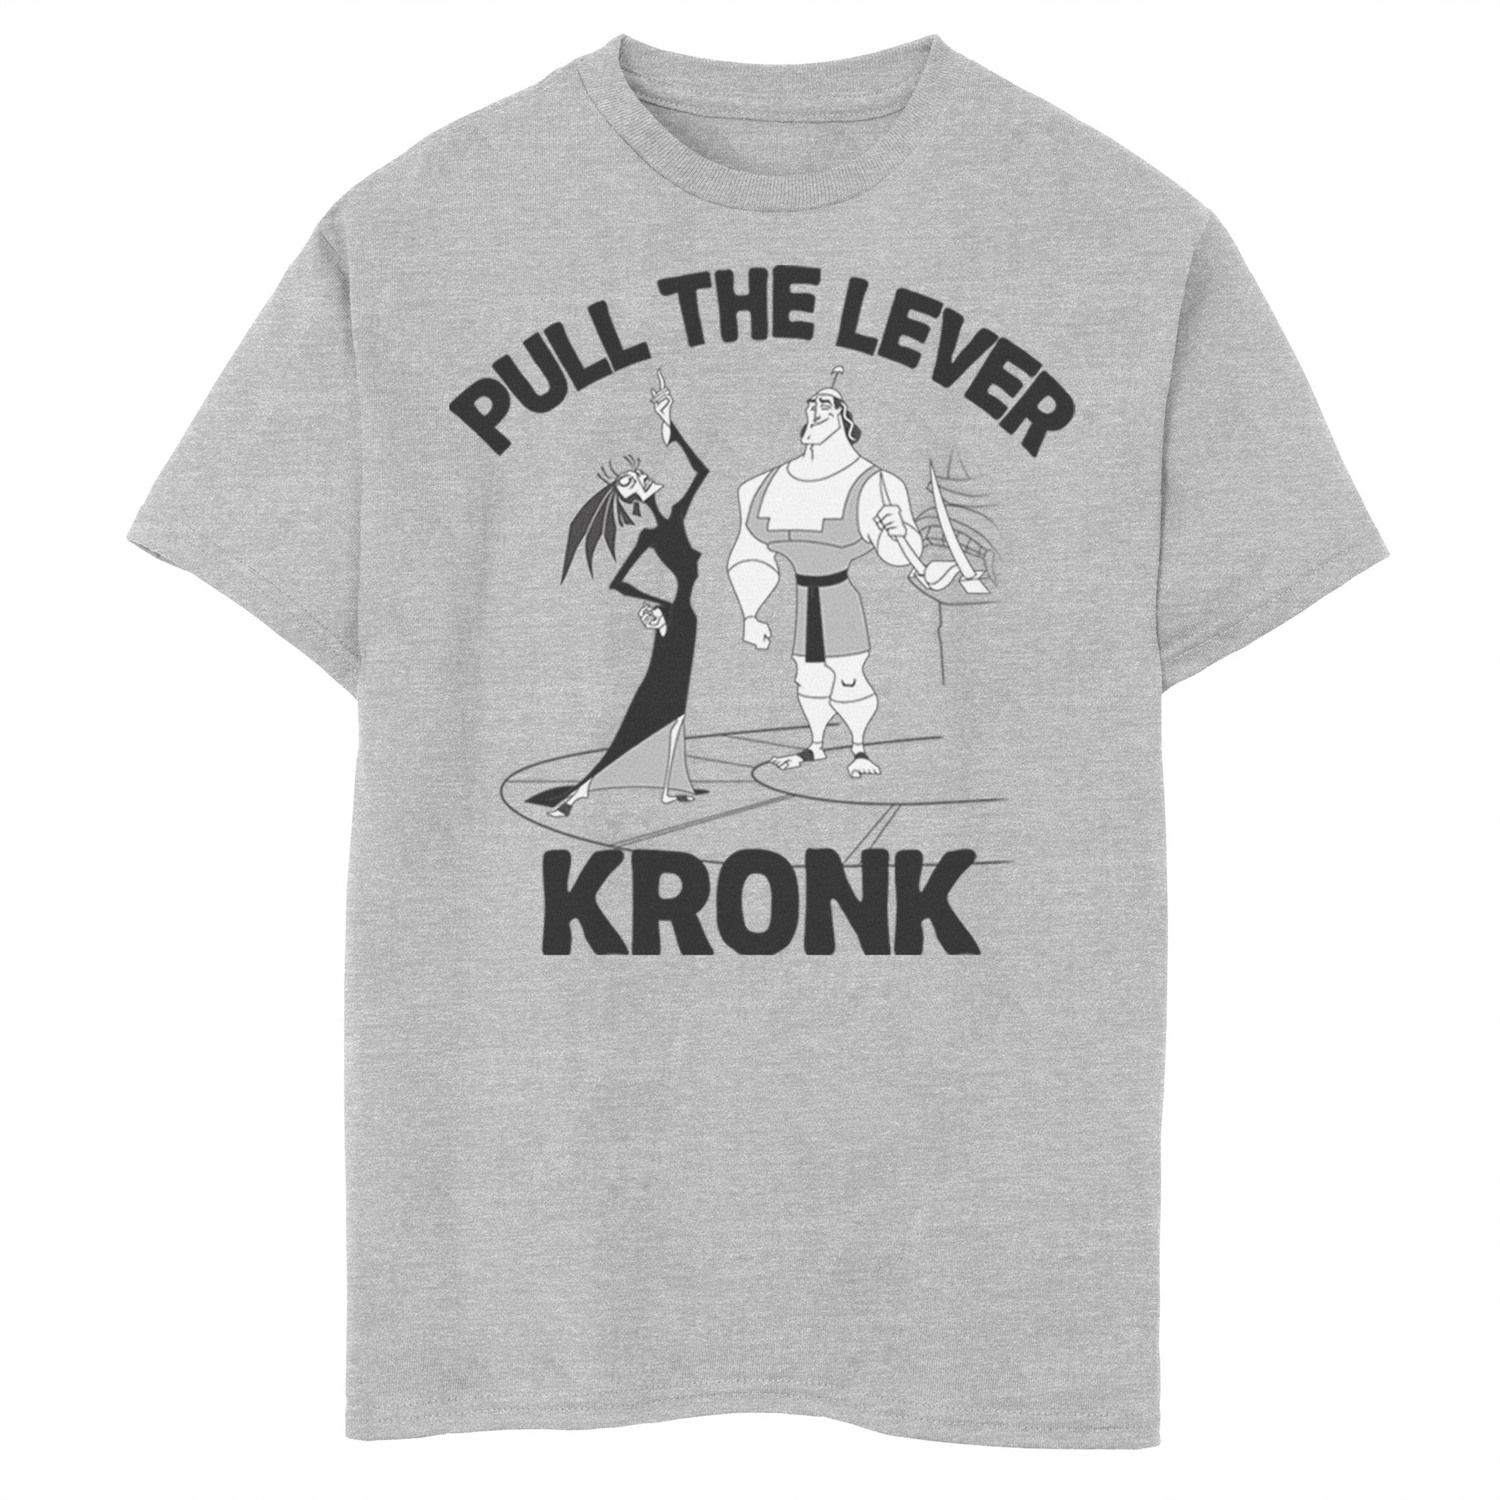 Image for Disney 's Emperor's New Groove Boys 8-20 Yzma Pull The Lever Kronk Graphic Tee at Kohl's.